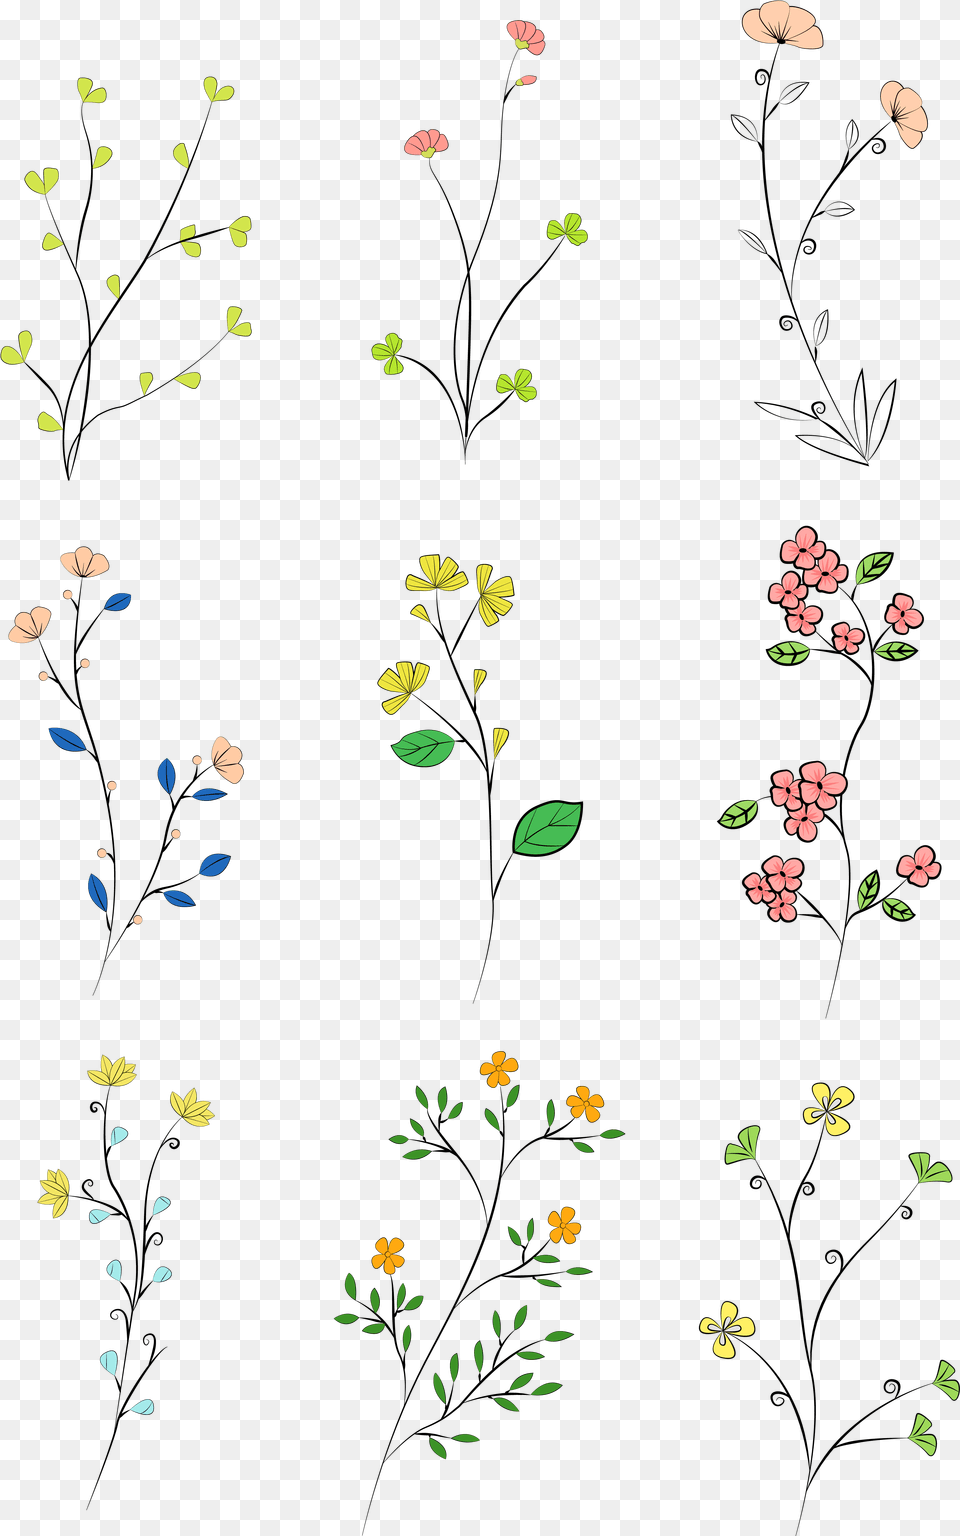 Hand Drawn Leaves Colored Plants And Vector, Paper, Pattern, Art, Floral Design Png Image